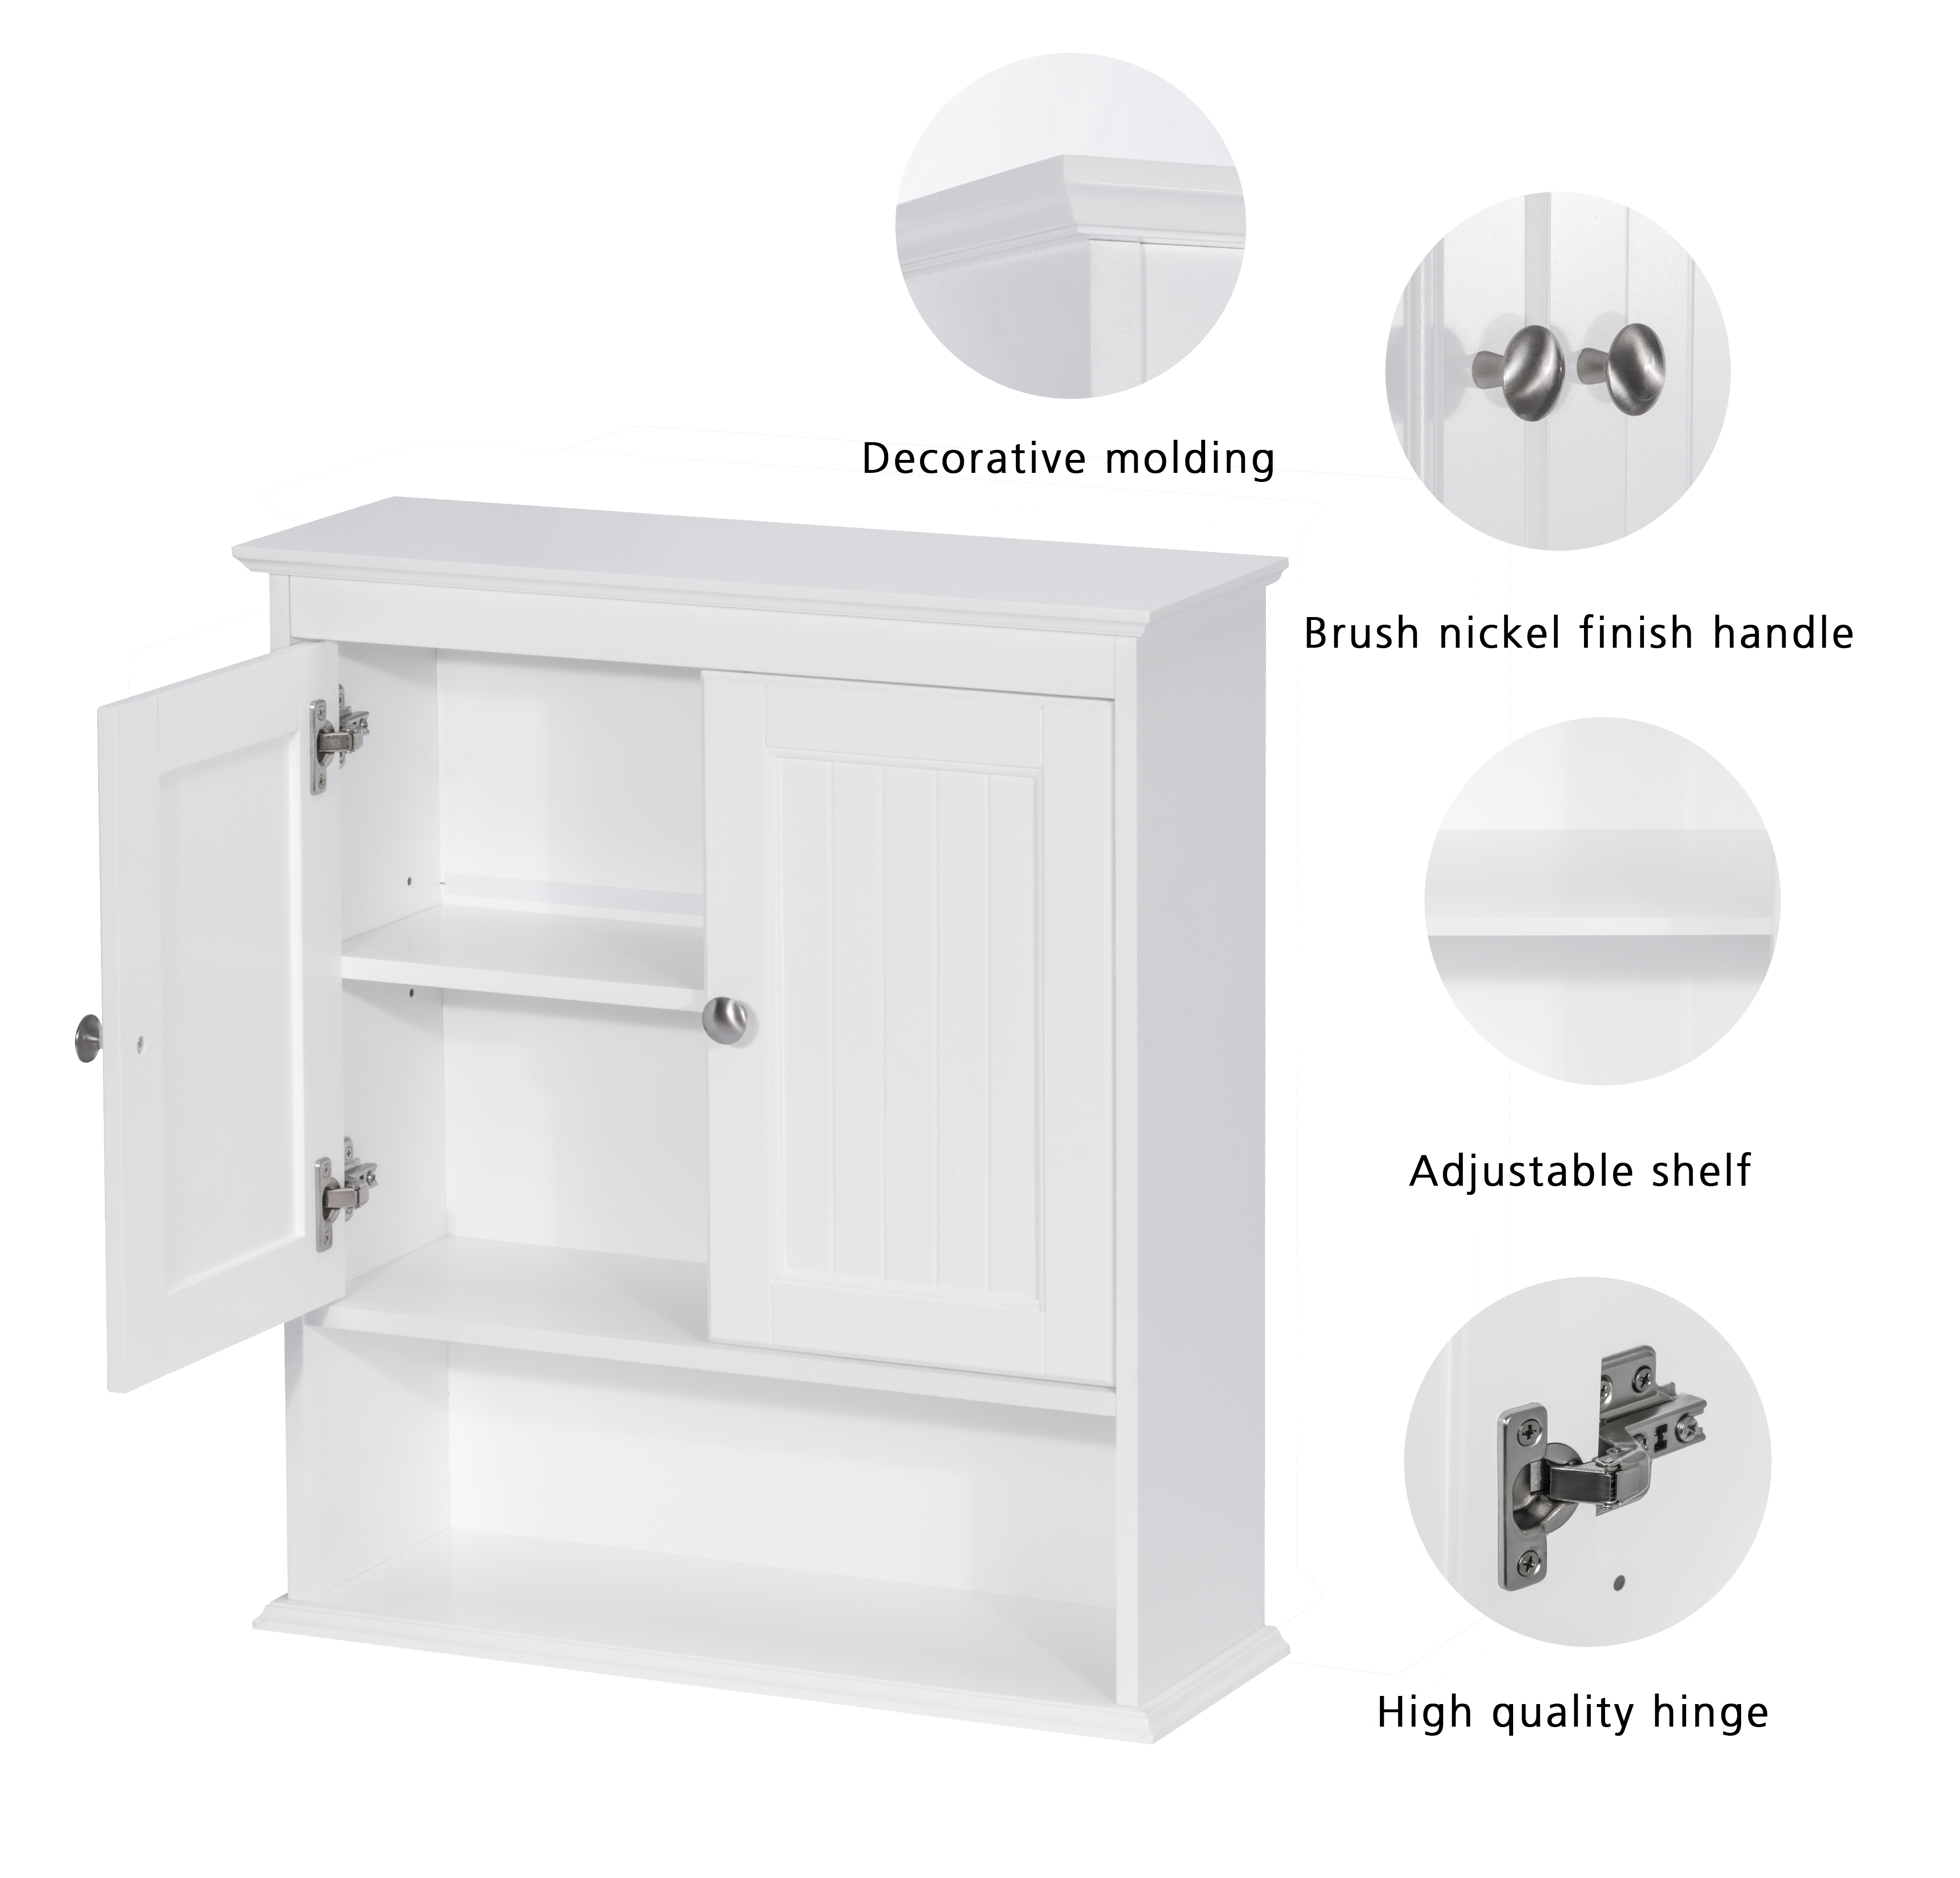 Spirich Home Bathroom Cabinet Wall Mounted with Doors, Wood Hanging Cabinet, Wall Cabinets with Doors and Shelves Over The Toilet, Bathroom Wall Cabinet White - image 4 of 6